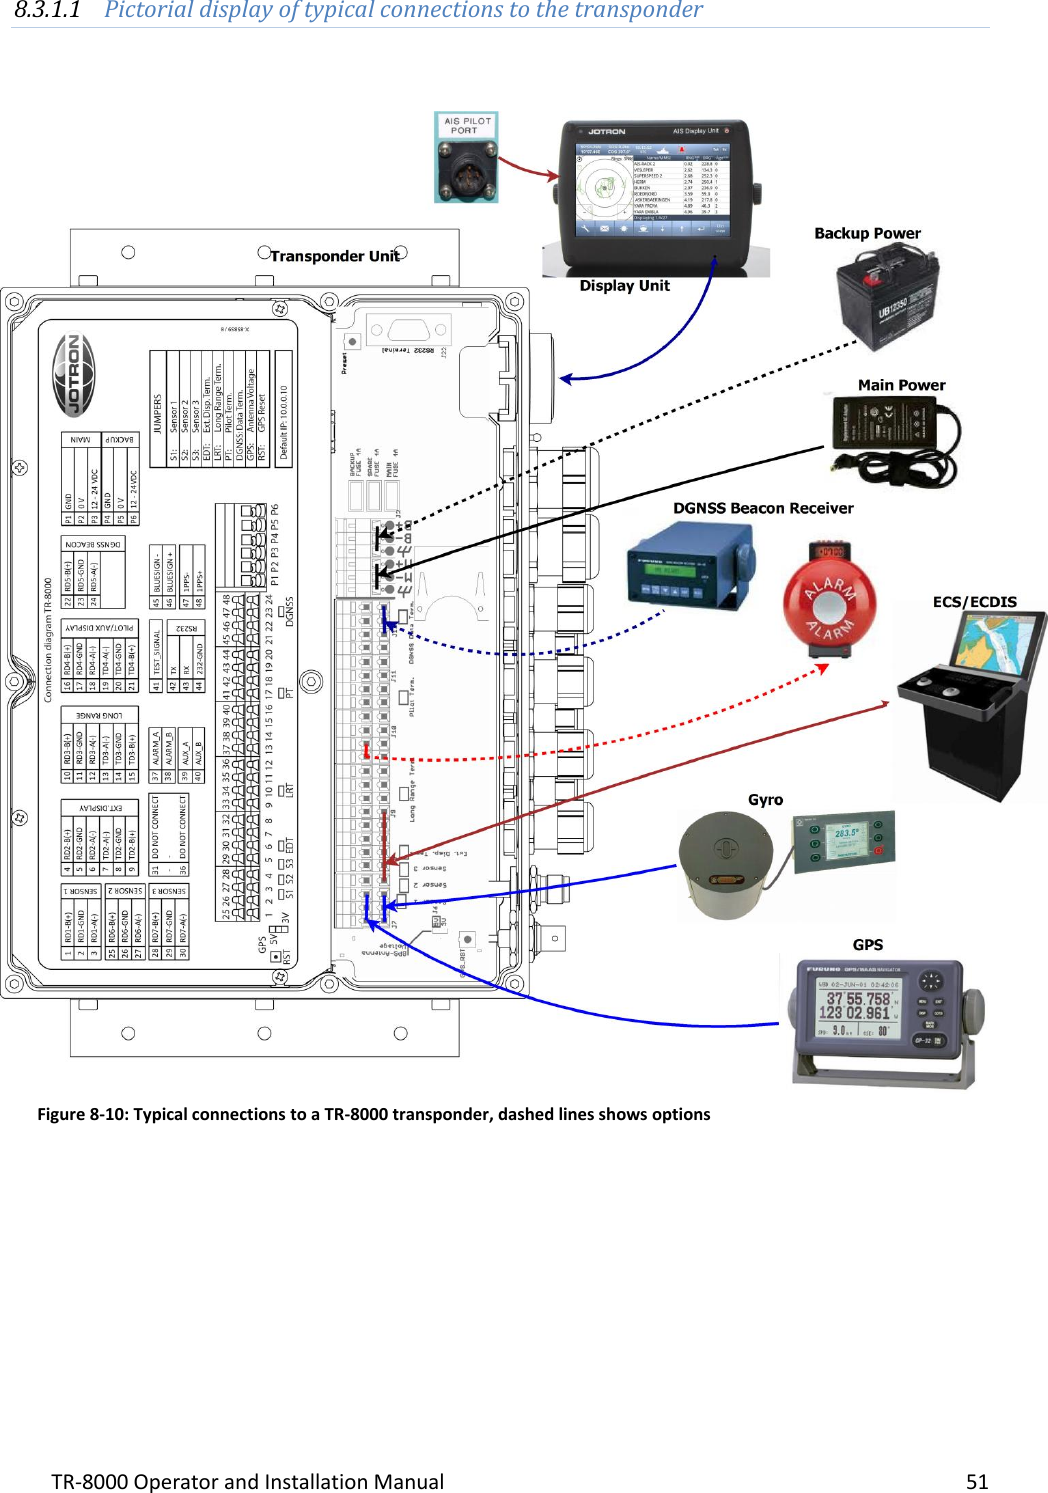 TR-8000 Operator and Installation Manual    51  8.3.1.1 Pictorial display of typical connections to the transponder   Figure 8-10: Typical connections to a TR-8000 transponder, dashed lines shows options 